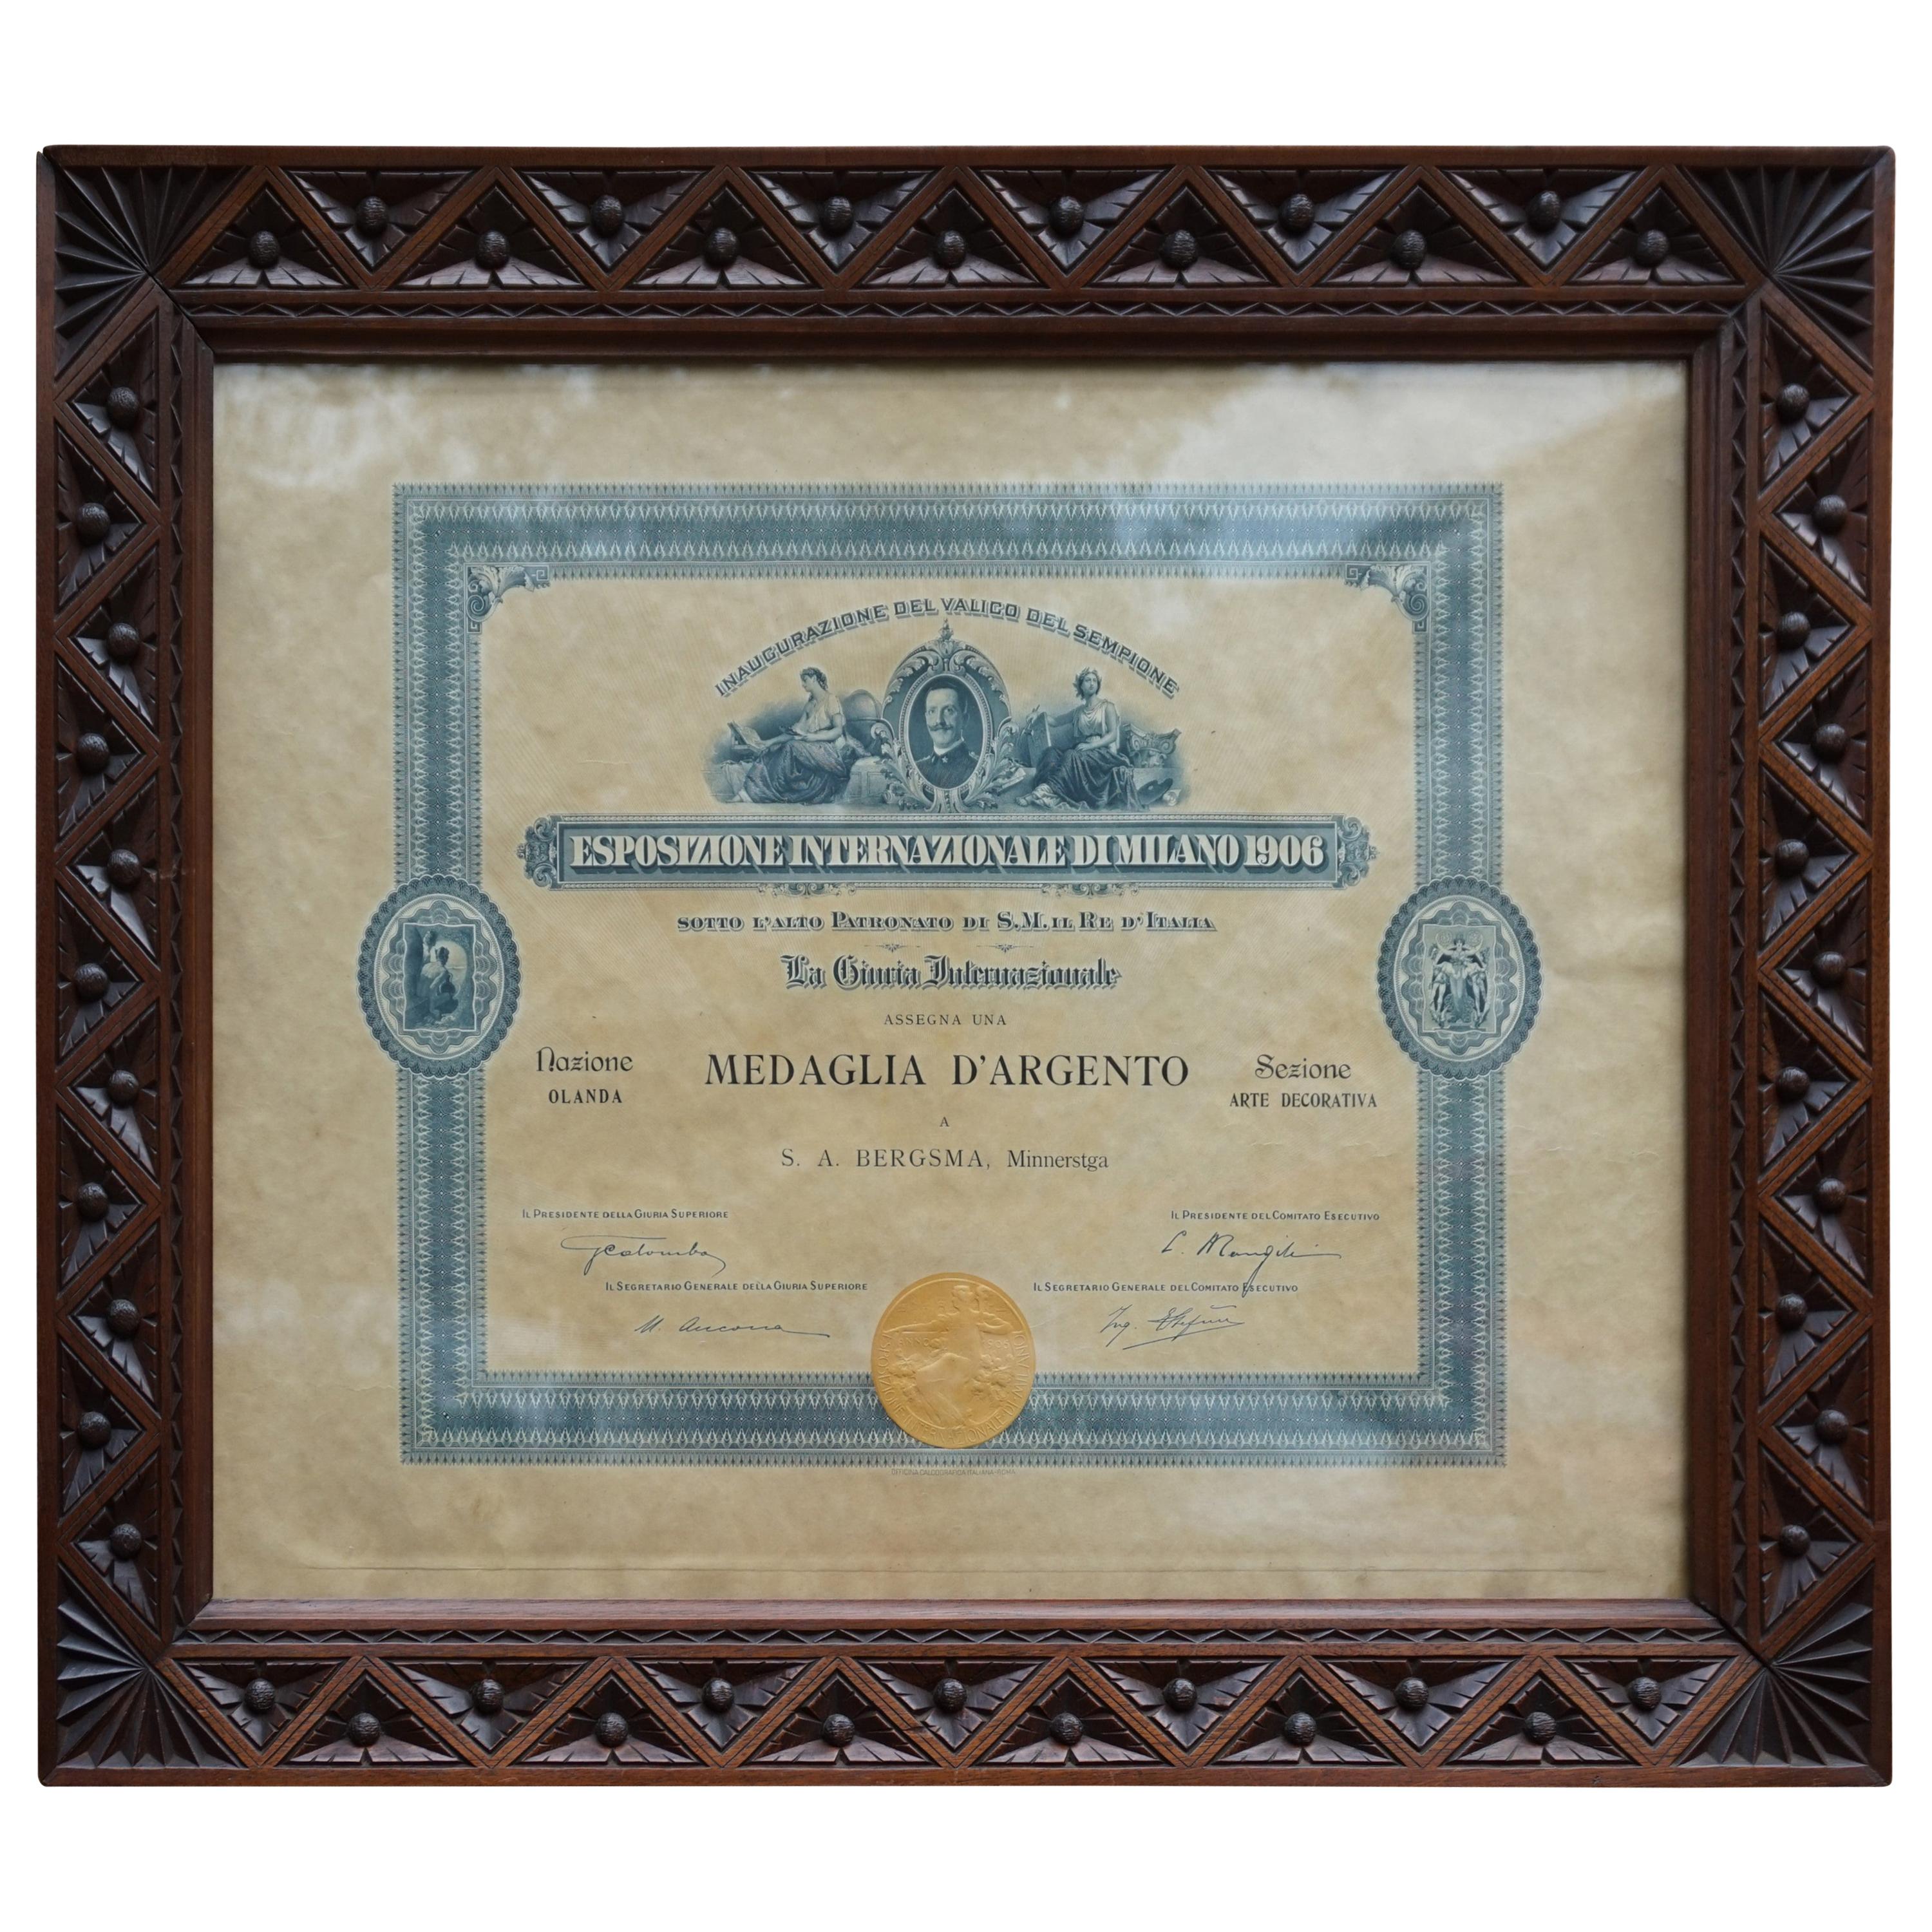 Silver Medal Document of World Exhibition in Milan 1906 in Arts and Crafts Frame For Sale